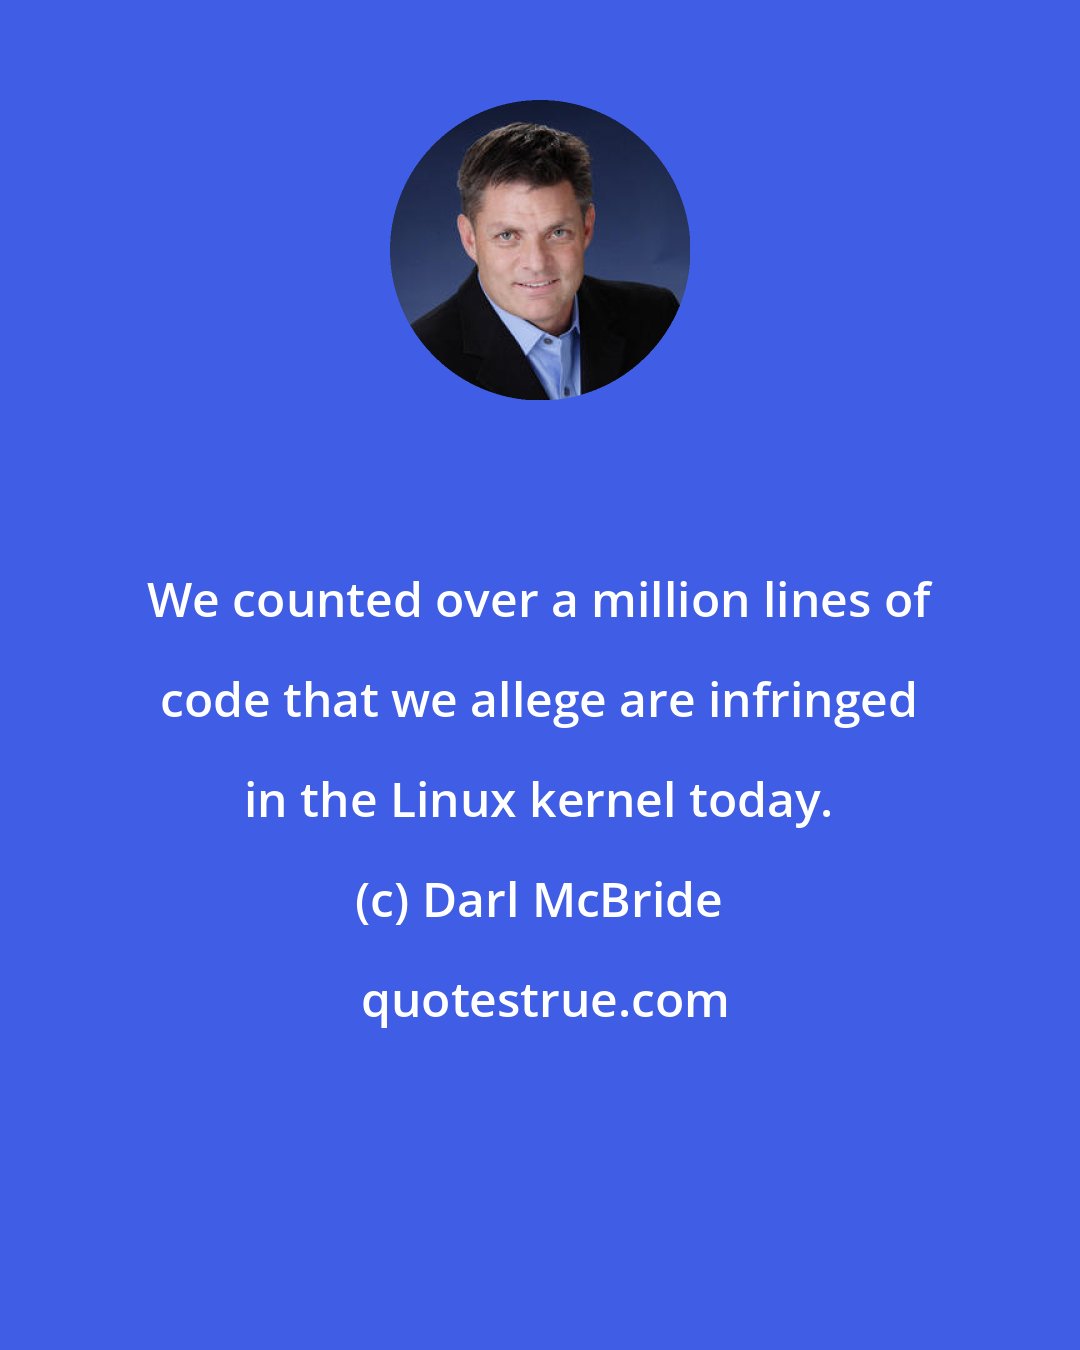 Darl McBride: We counted over a million lines of code that we allege are infringed in the Linux kernel today.